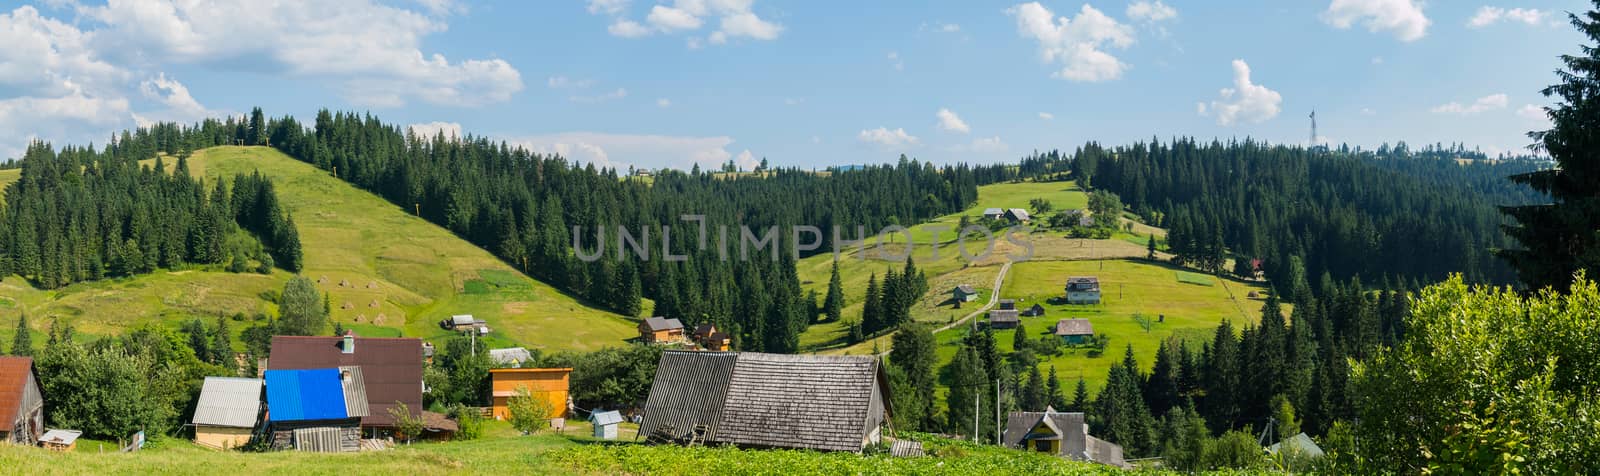 panorama of Transcarpathian village surrounded by coniferous forest